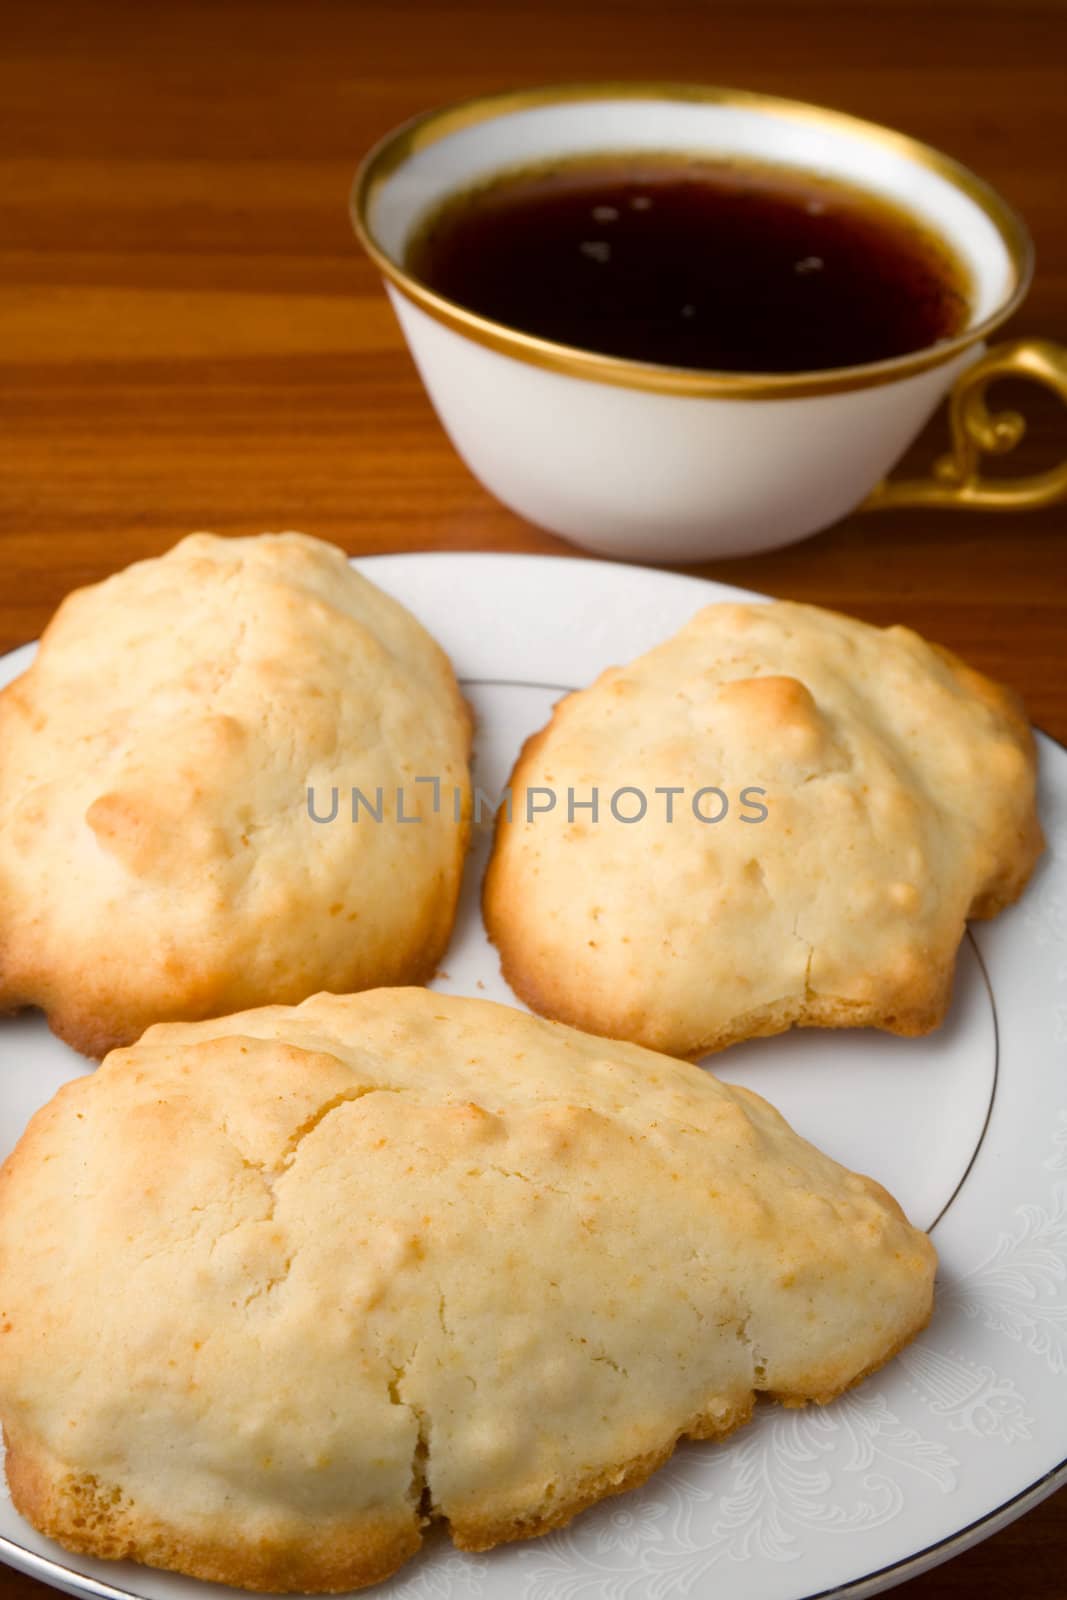 Southern style biscuits ready to eat